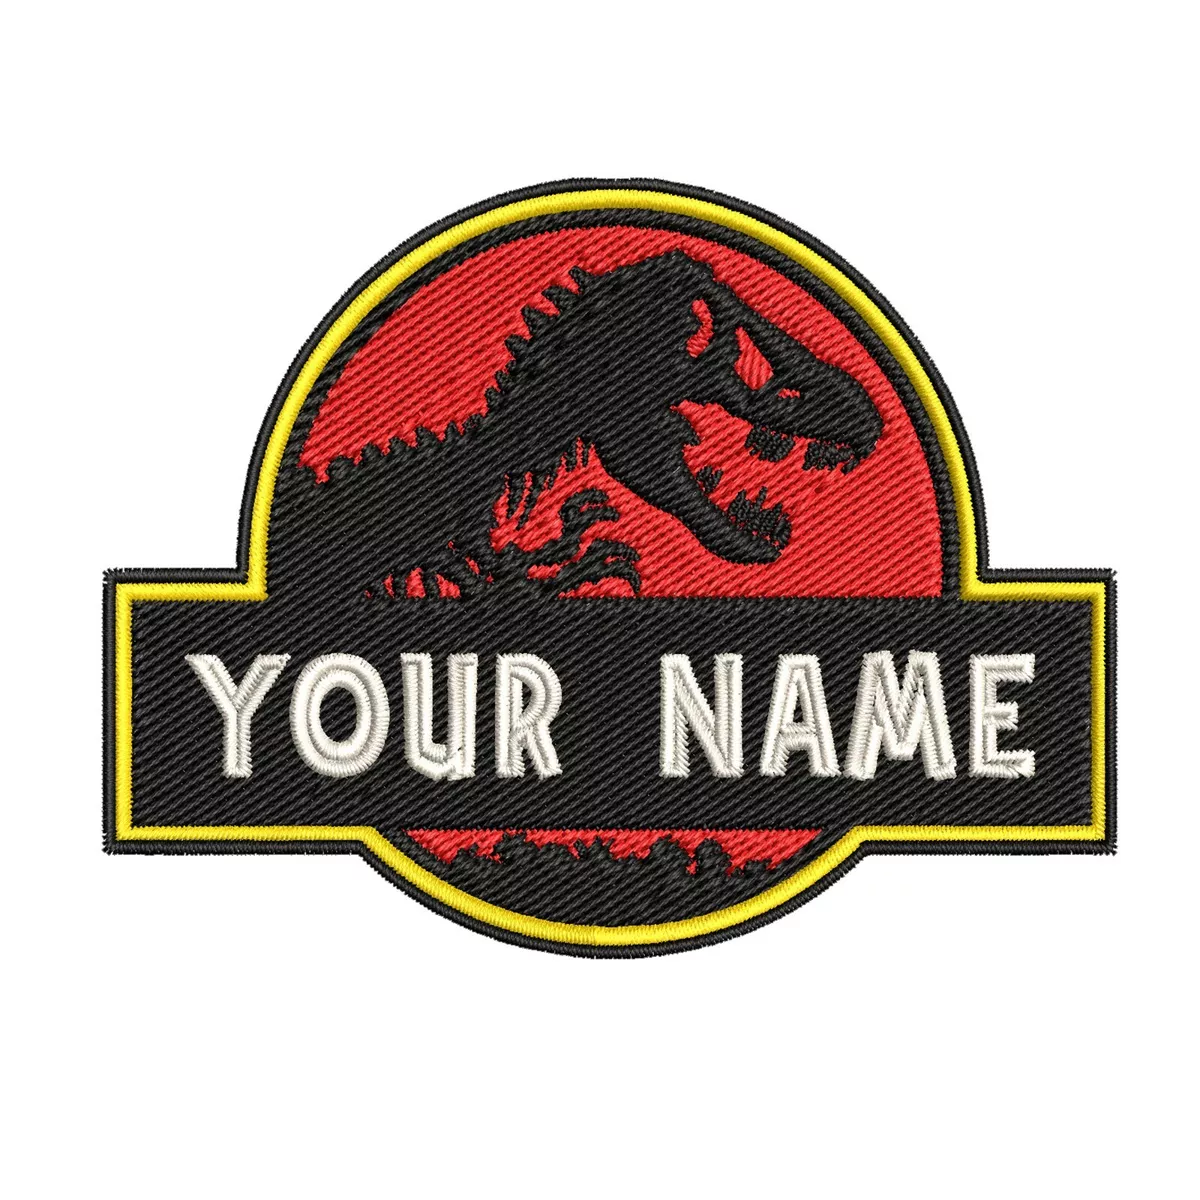  Name Patch Uniform Work Shirt Personalized Embroidered White  with Red Border. Iron on.